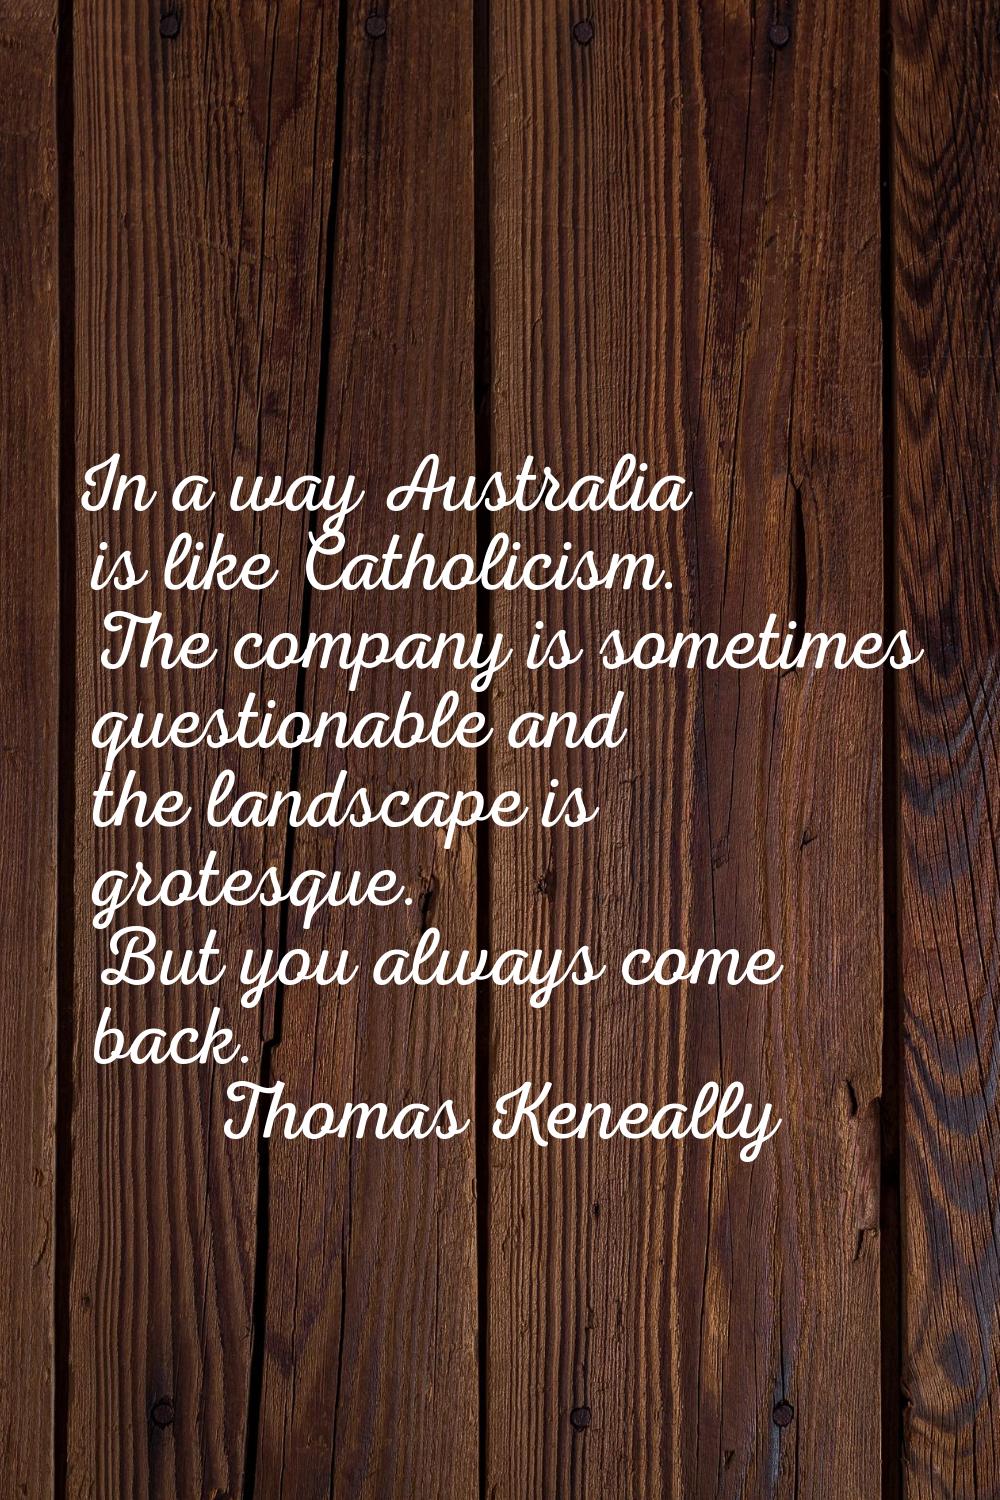 In a way Australia is like Catholicism. The company is sometimes questionable and the landscape is 